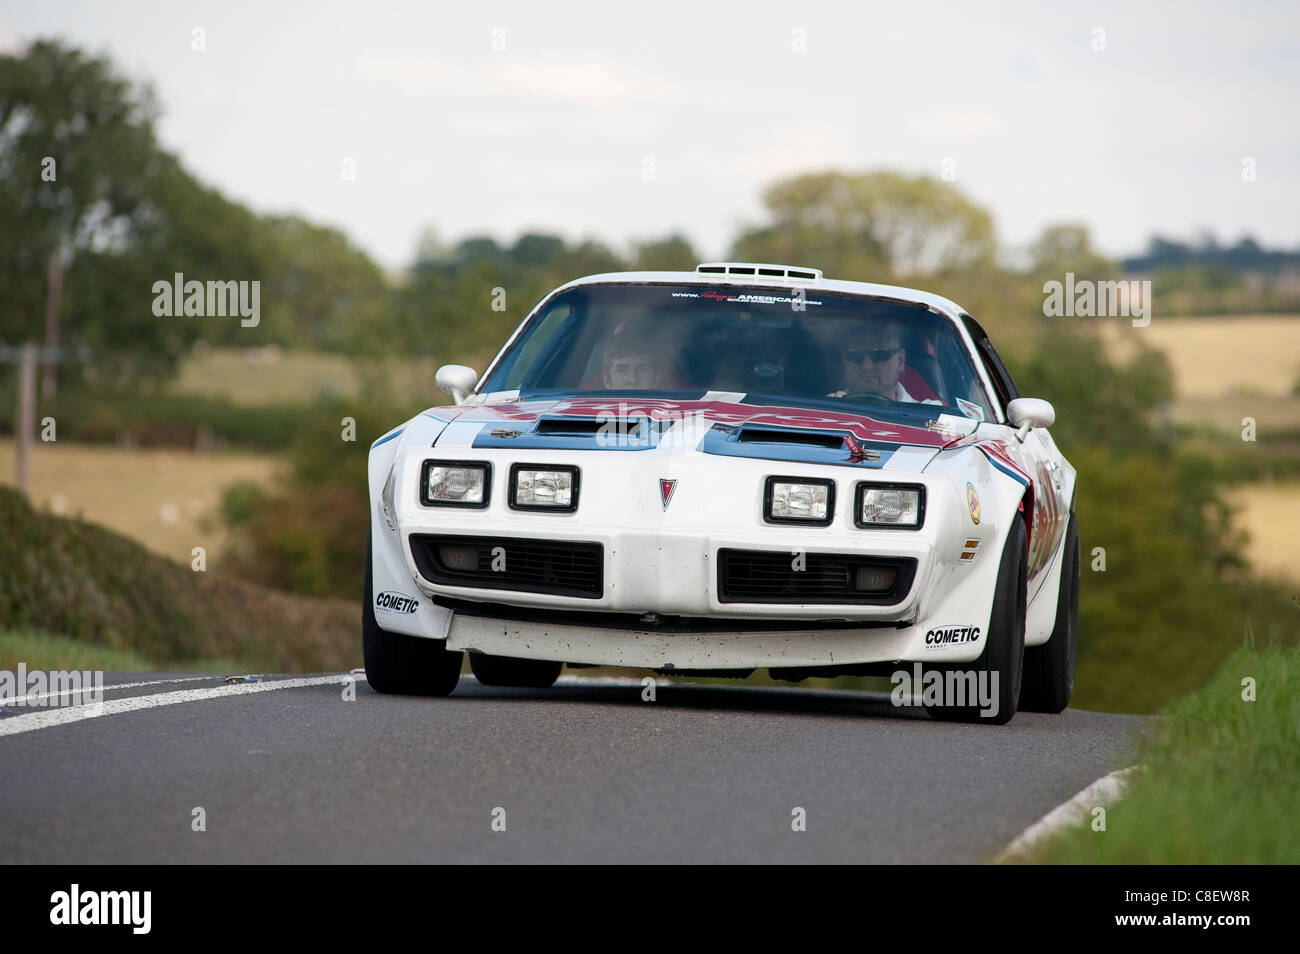 1970's Pontiac Firebird Trans Am car being driven on a road in England. Stock Photo